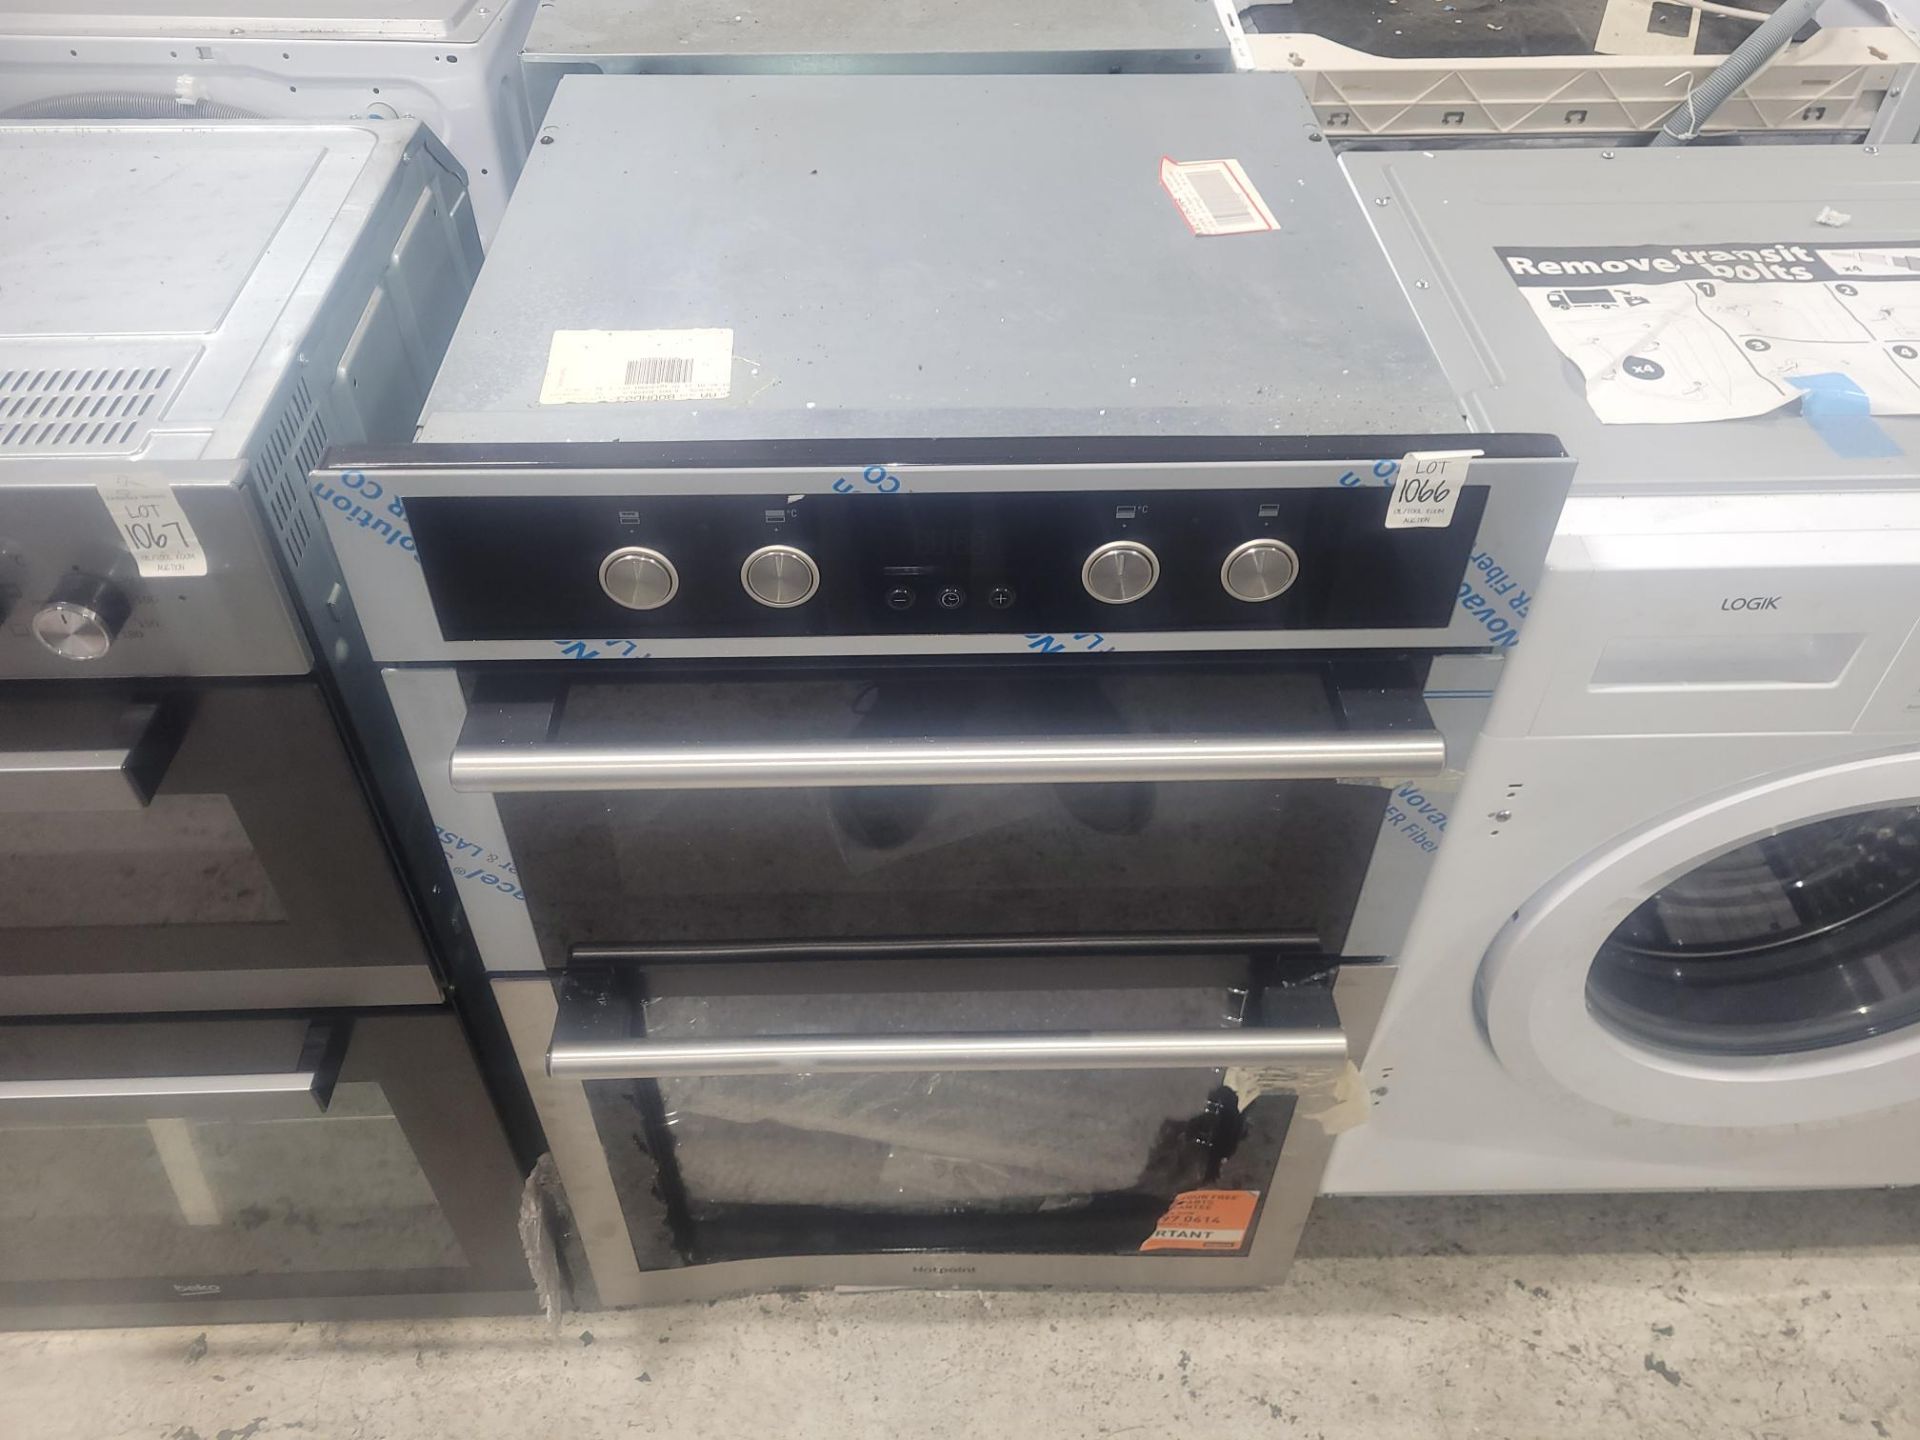 HOTPOINT INTEGRATED DOUBLE OVEN (NEW WITH DAMAGED DOOR)